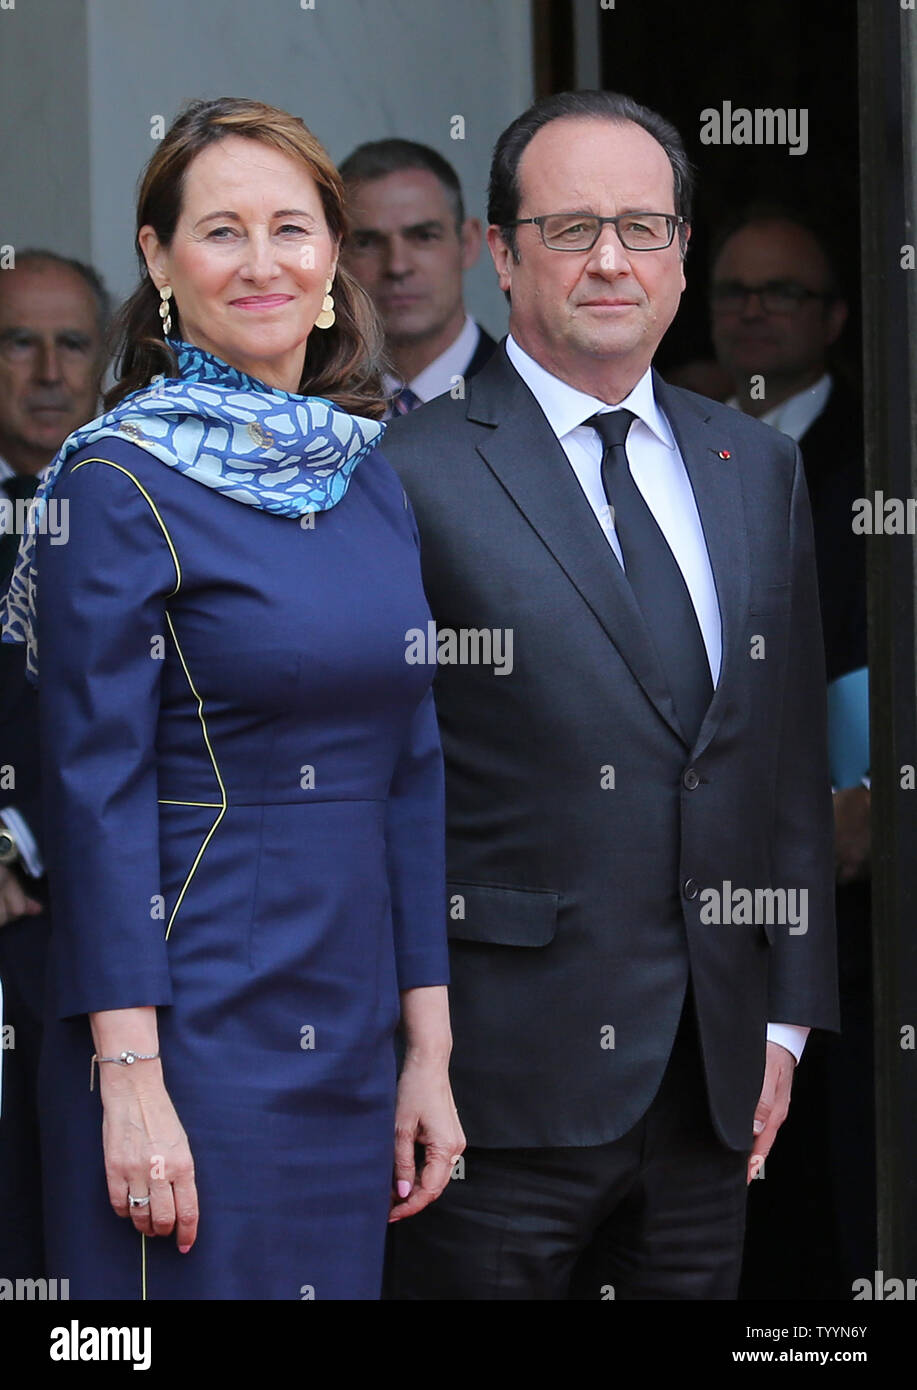 French Minister for Ecology Segolene Royal (L) and French President Francois Hollande arrive at the Elysee Palace during a Spain state visit in Paris June 2, 2015.  The Spanish royals are in Paris for a state visit that was originally scheduled for March but was delayed due to the deadly Germanwings plane crash in the French Alps involving many Spanish victims.   Photo by David Silpa/UPI Stock Photo